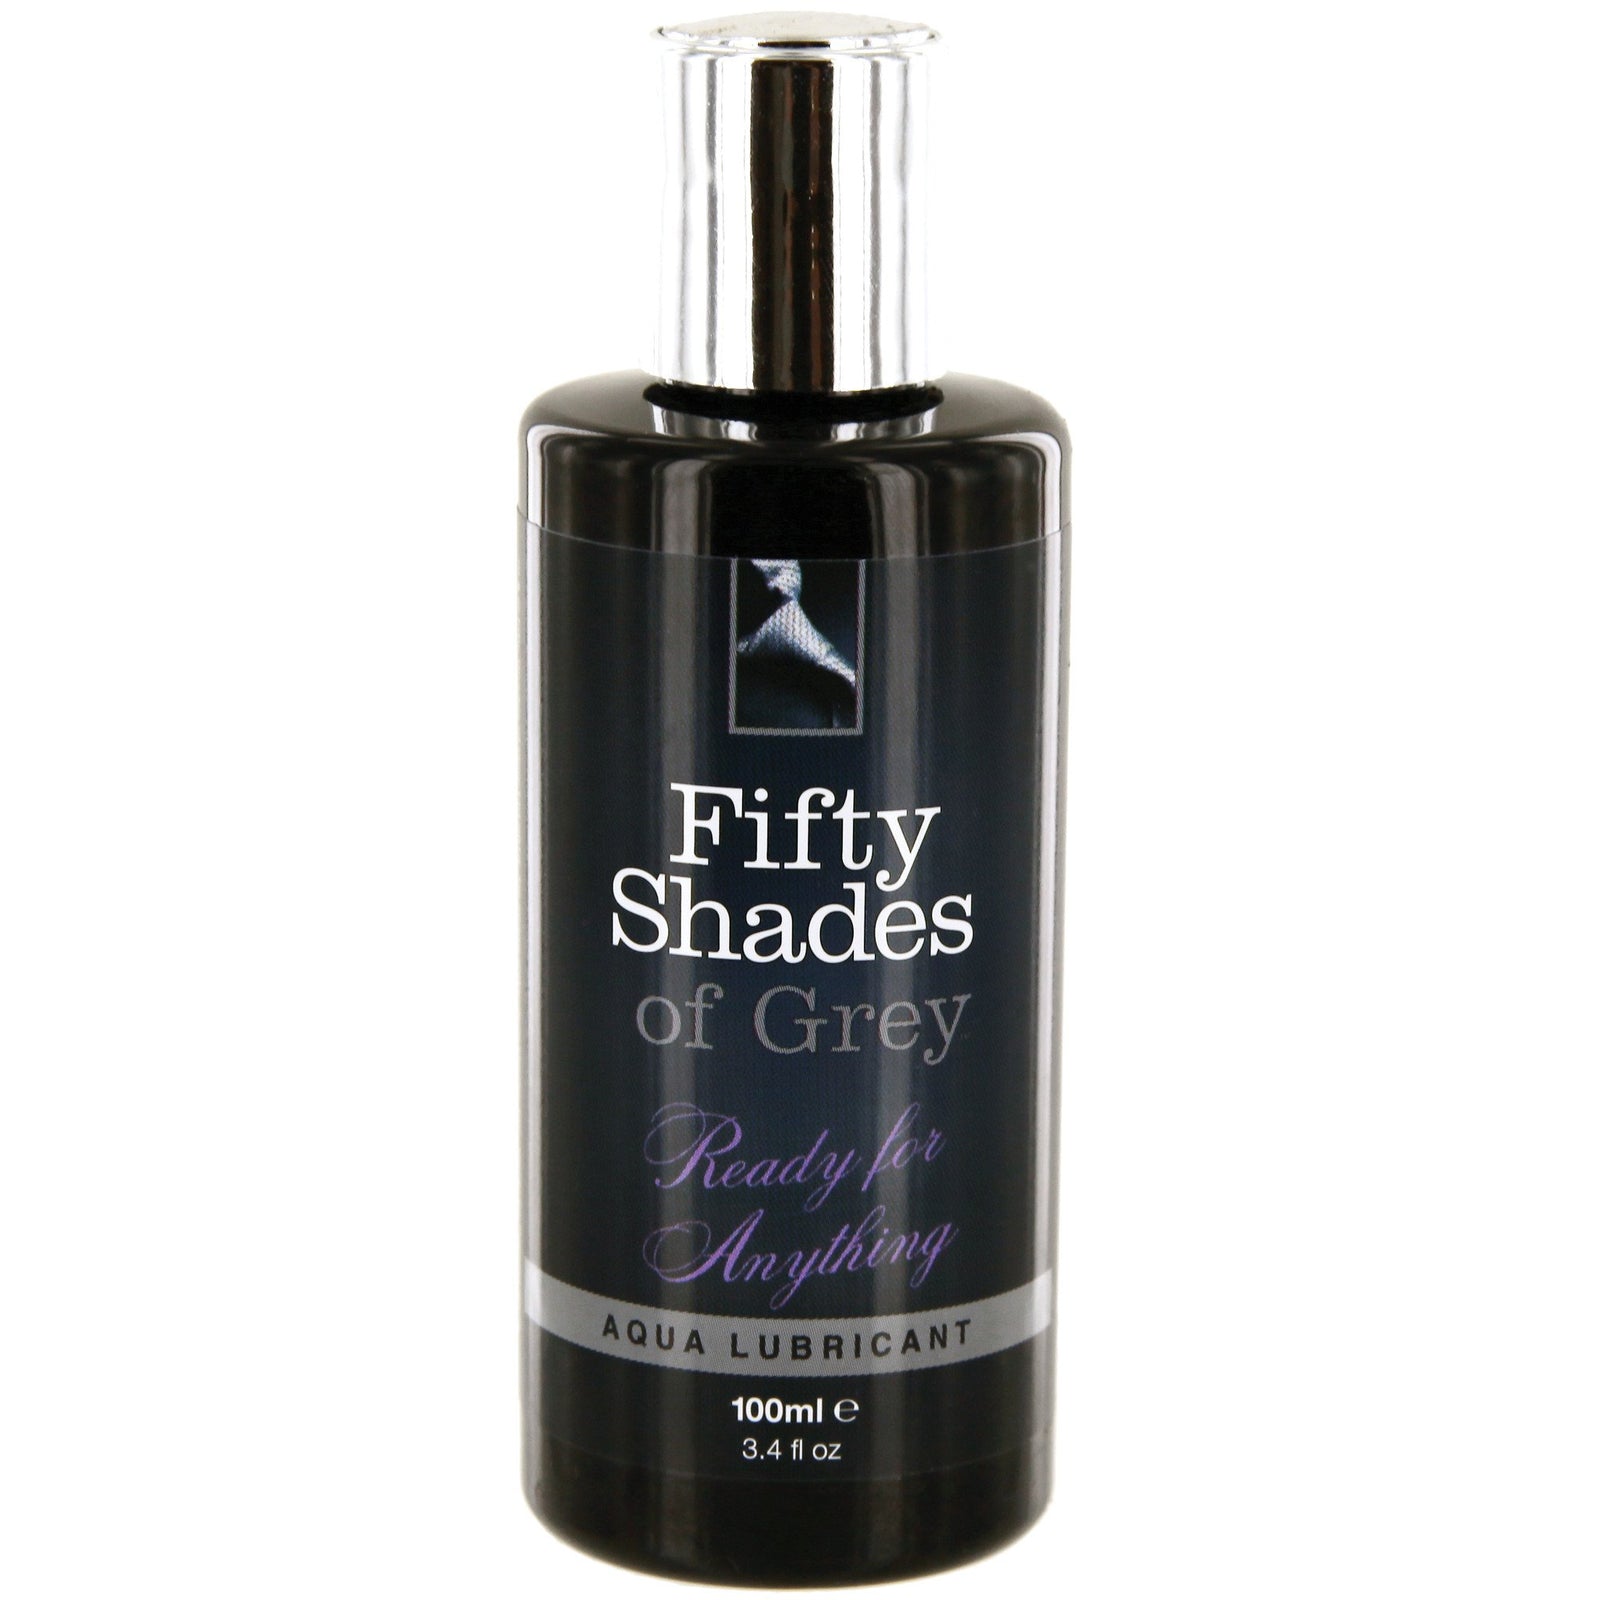 Fifty Shades of Grey - Ready for Anything Aqua Lubricant Lube (Water Based) Durio Asia